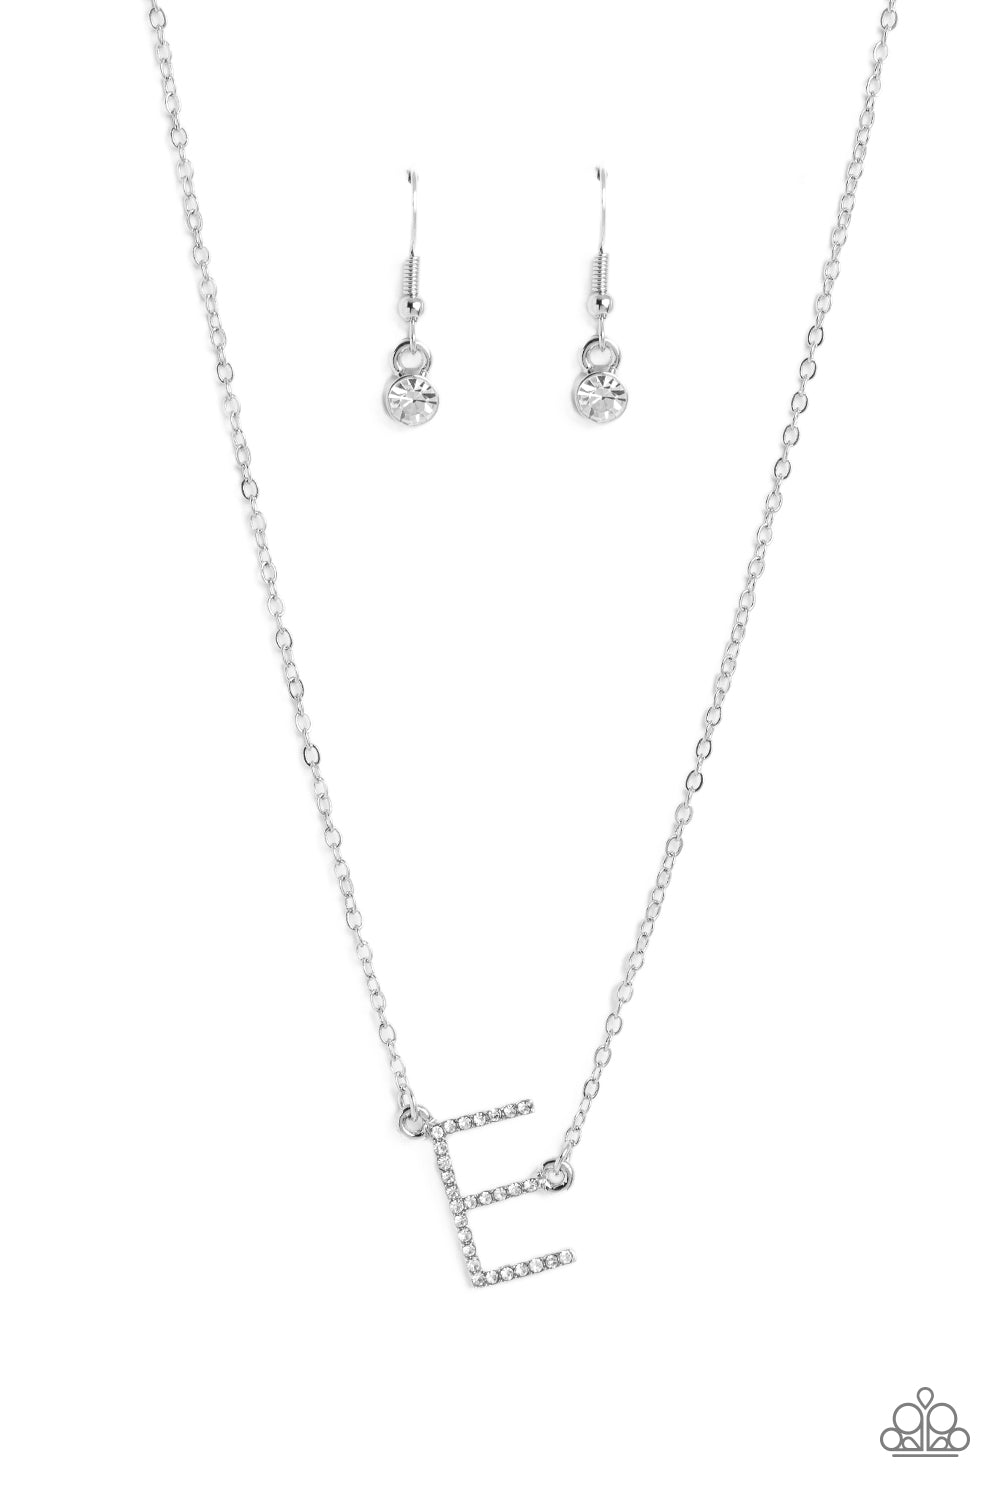 INITIALLY Yours White "E" Necklace - Paparazzi Accessories